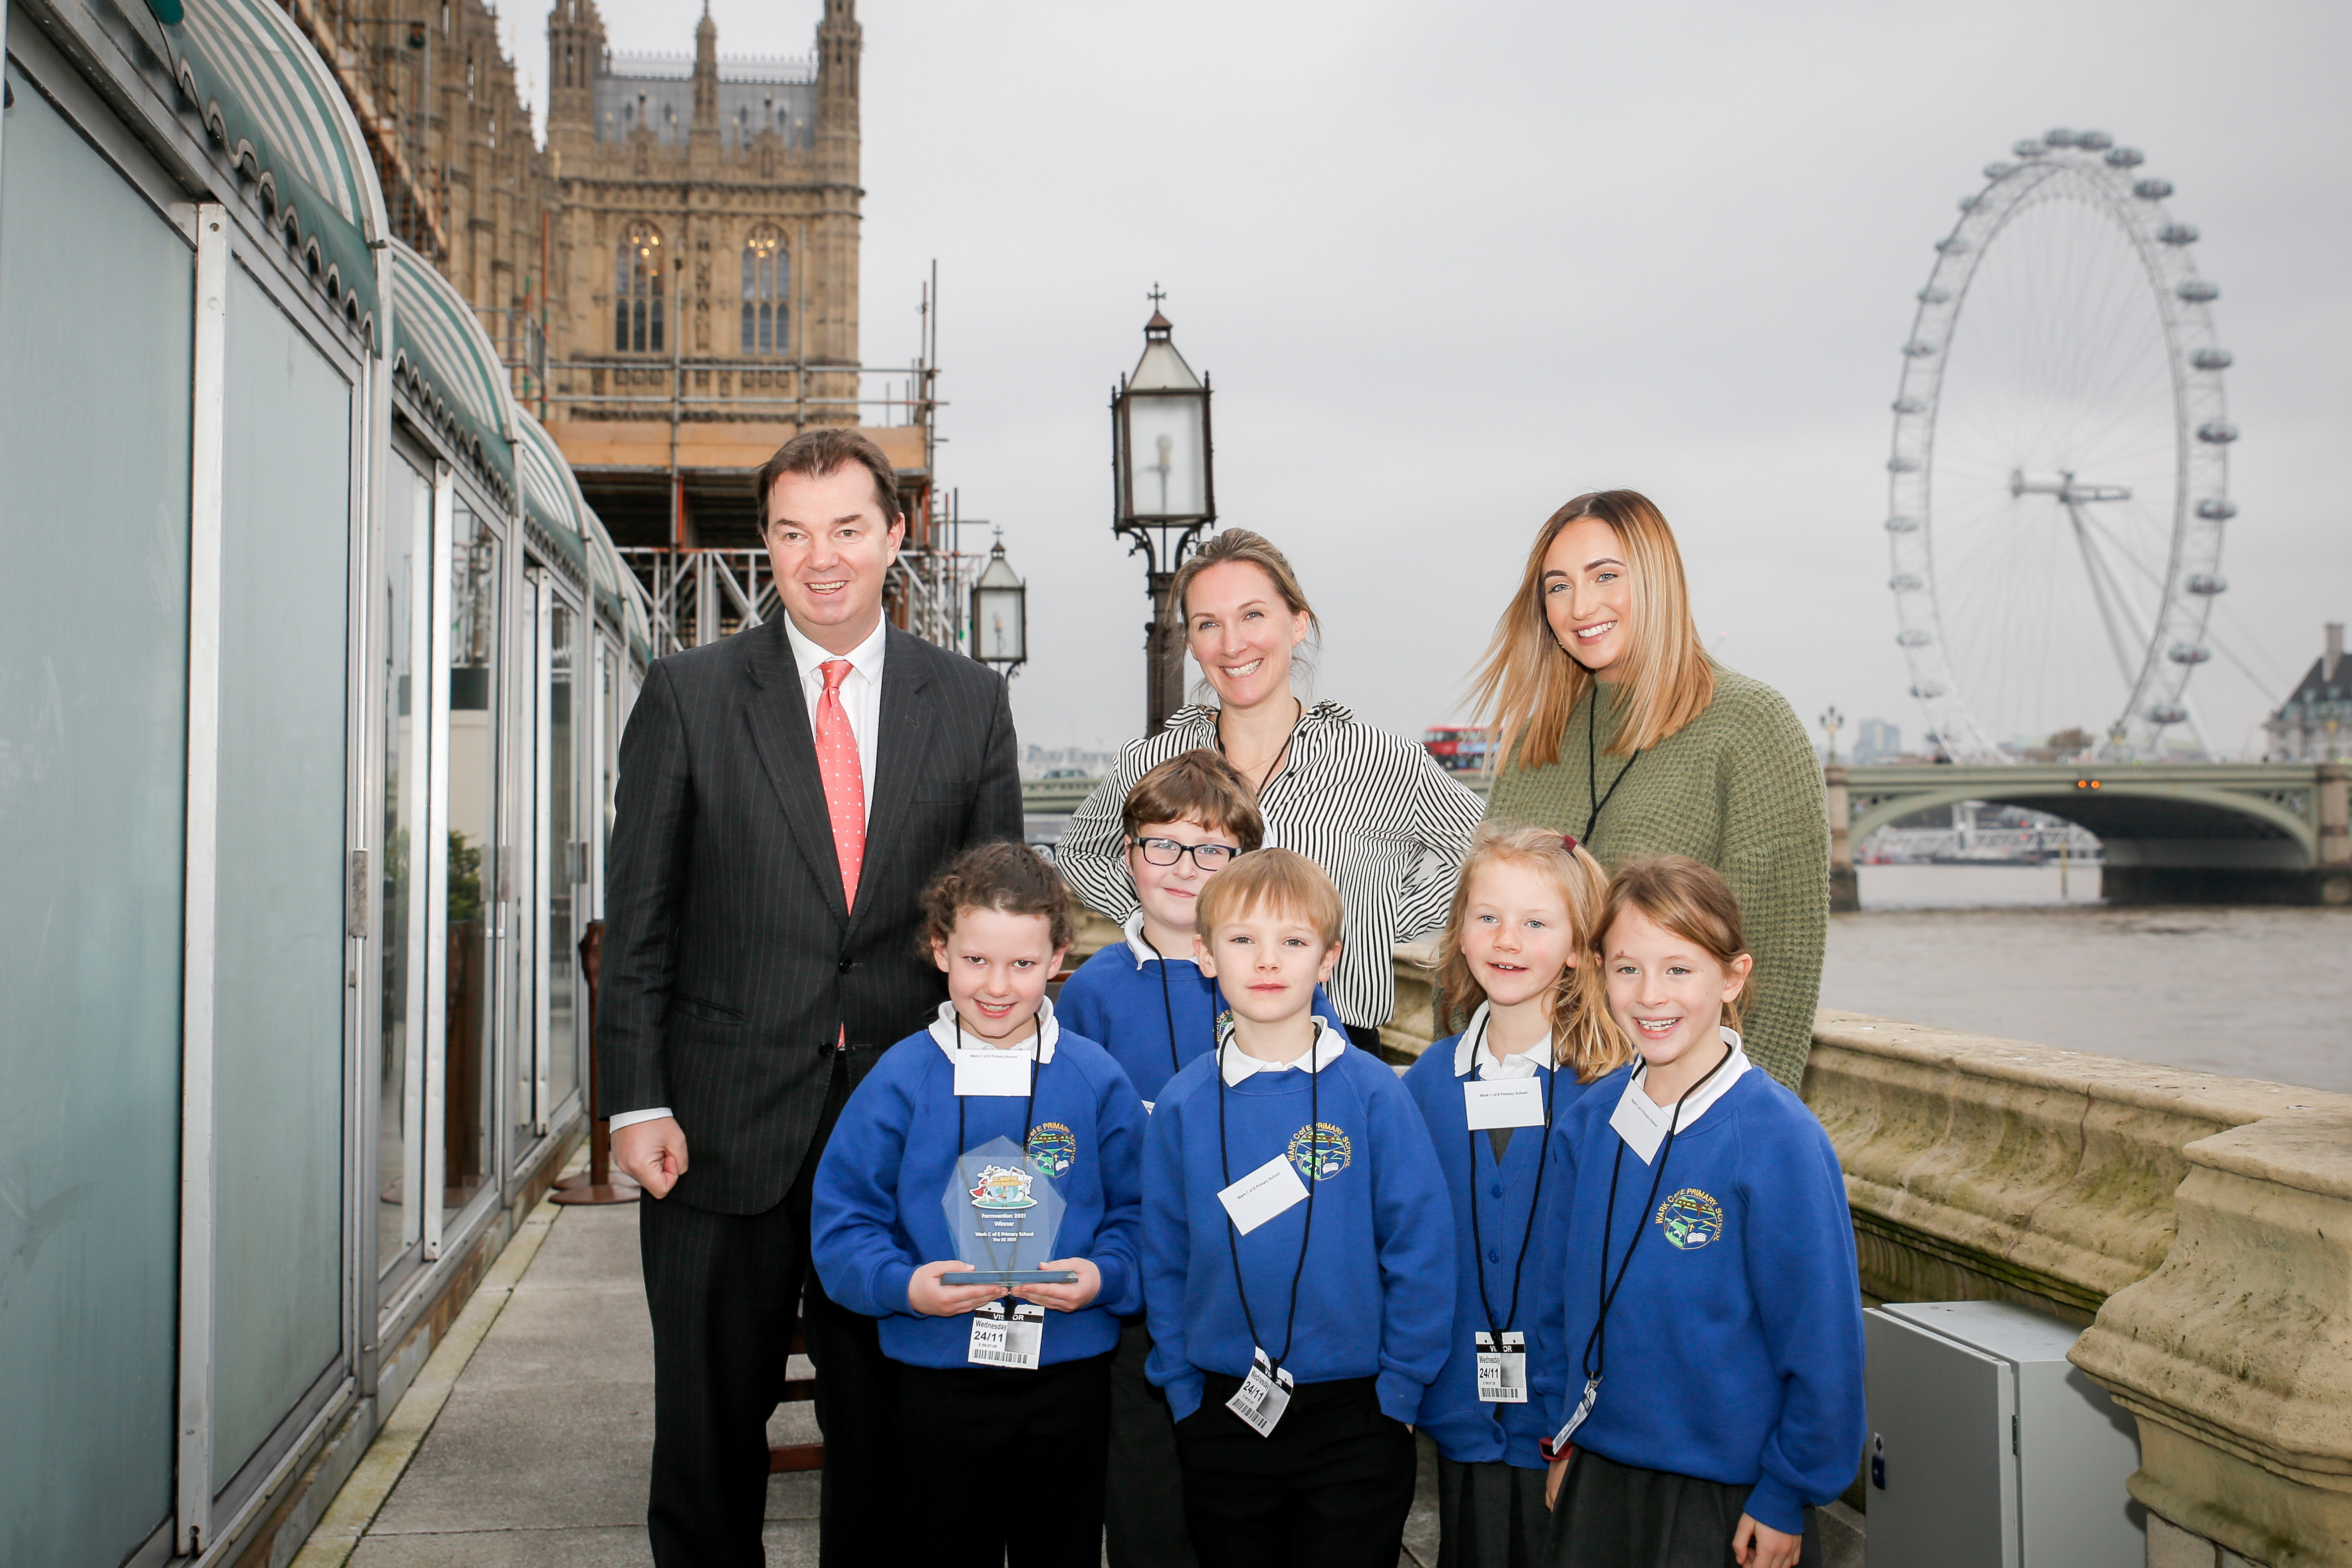 Farmvention - Guy Opperman MP with pupils and teachers from Wark C of E Primary School at the Farmvention event November 2021